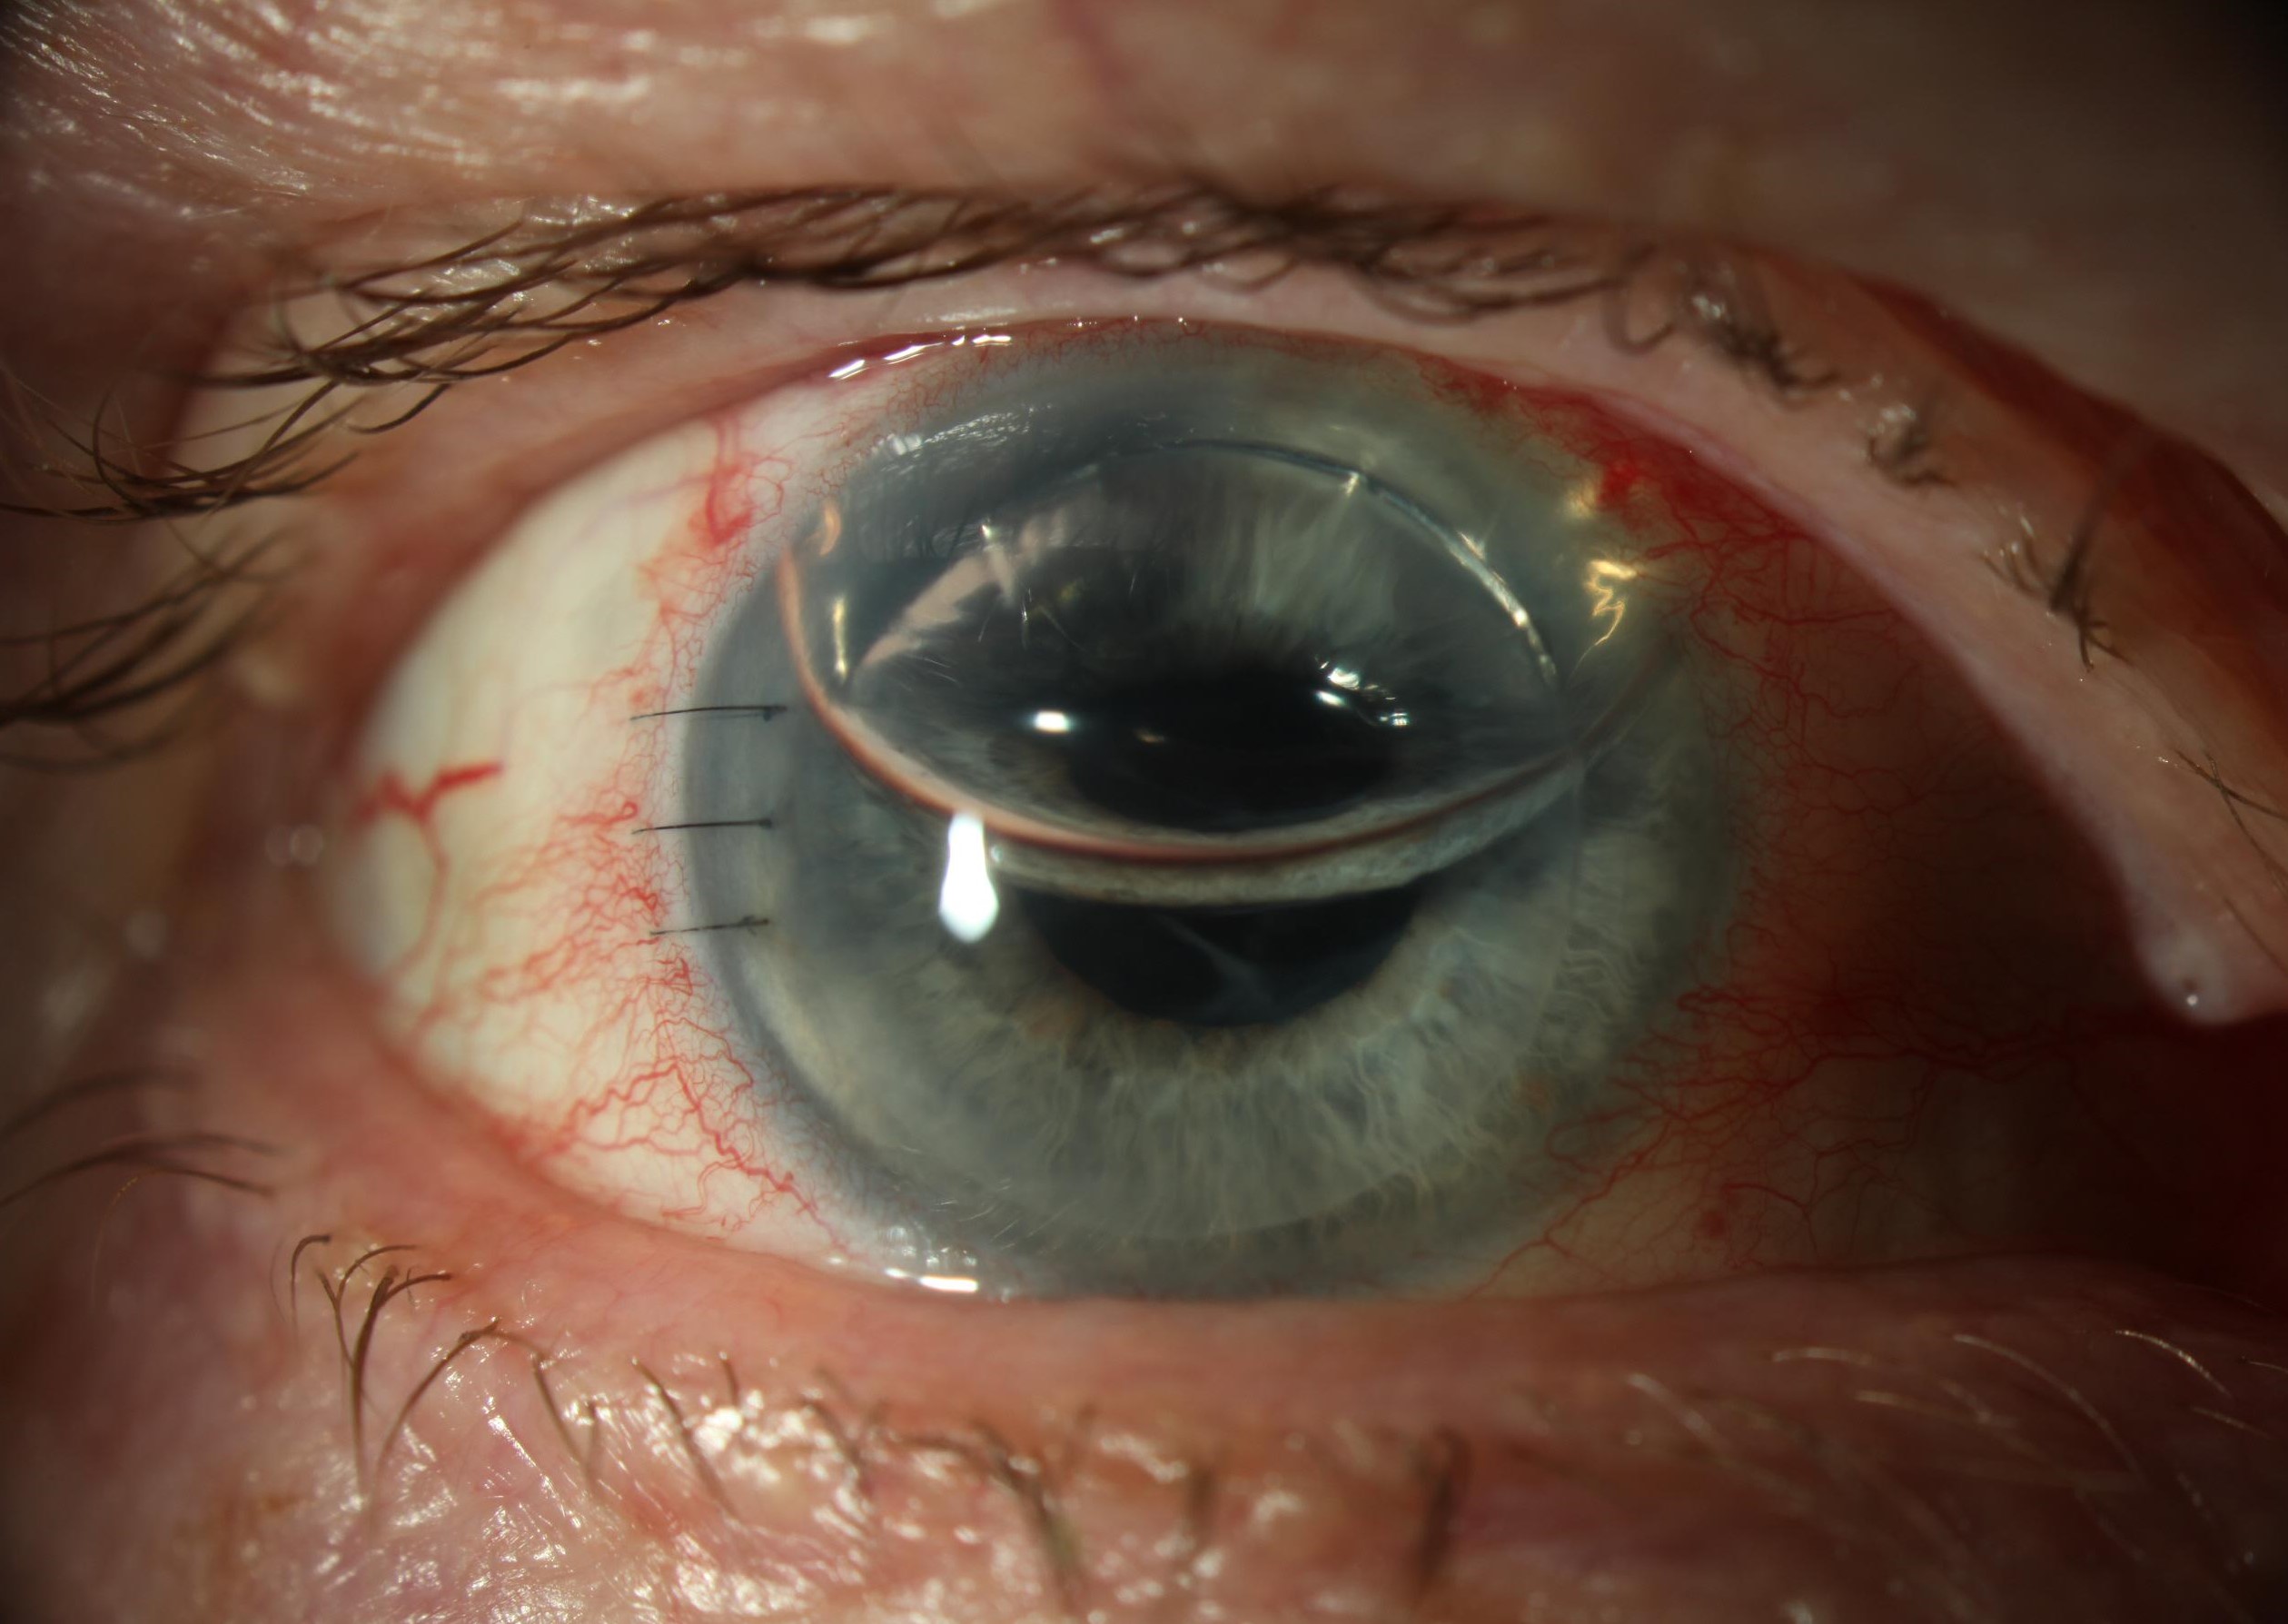 This is a patient one day post-DSAEK. For both DSAEK and DMEK, the transplants are supported by the air bubble in the anterior chamber. Both transplant types require supine positioning that can be difficult for people with spinal problems, and they suffer from periodic early dislocation of the graft, but in this case the eye and transplant are healing well.